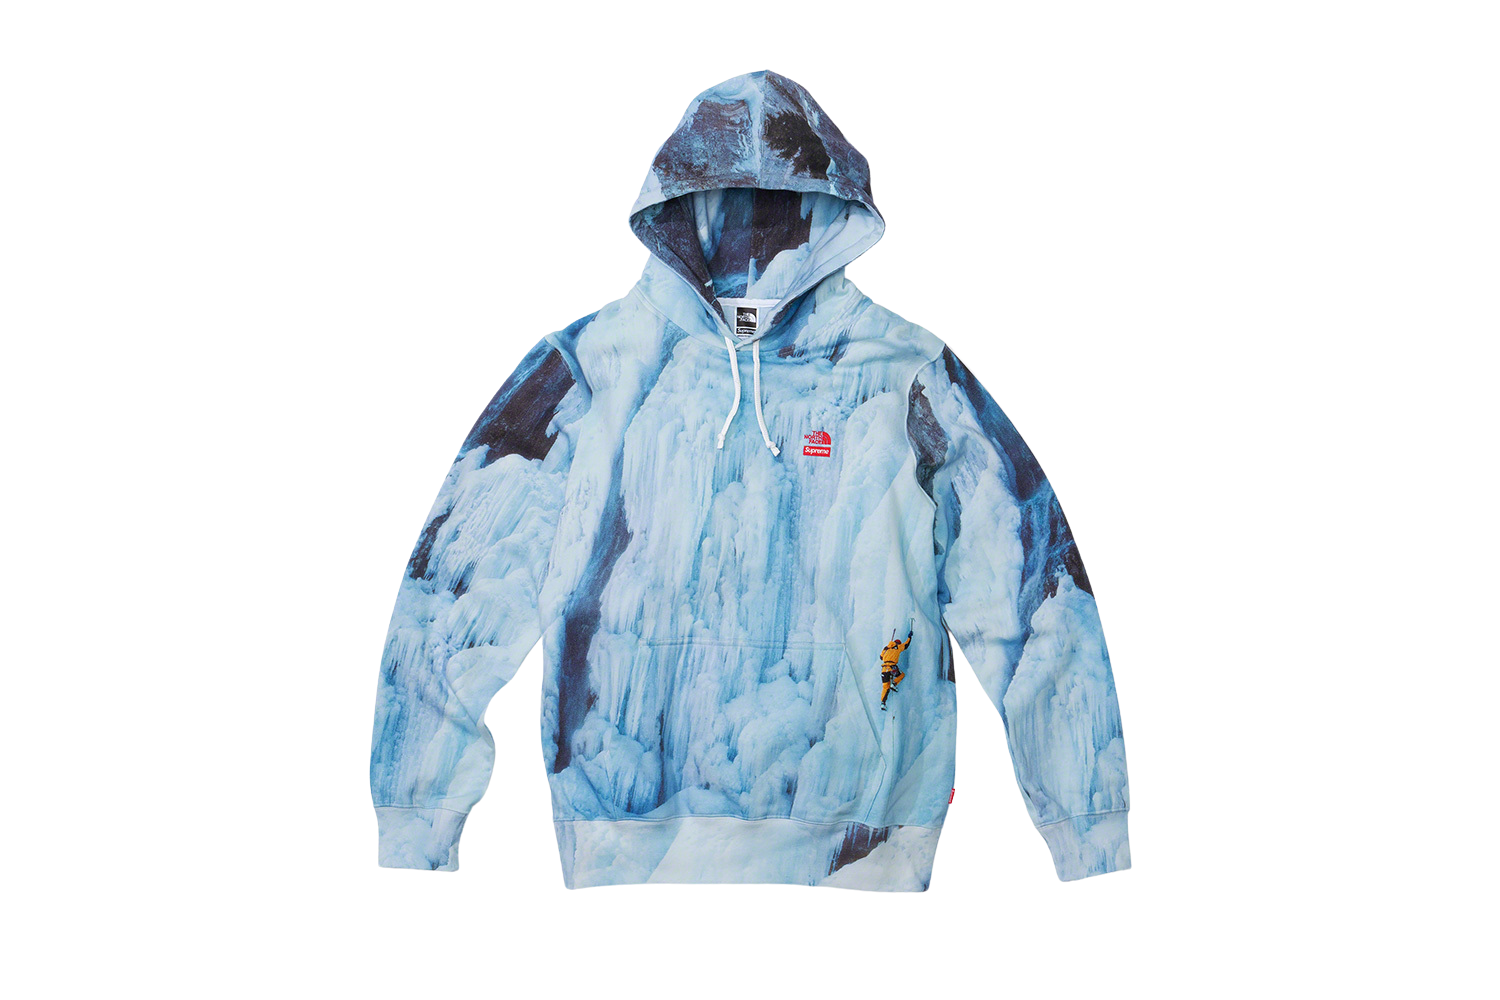 The North Face Ice Climb Hooded Sweatshirt - spring summer 2021 - Supreme